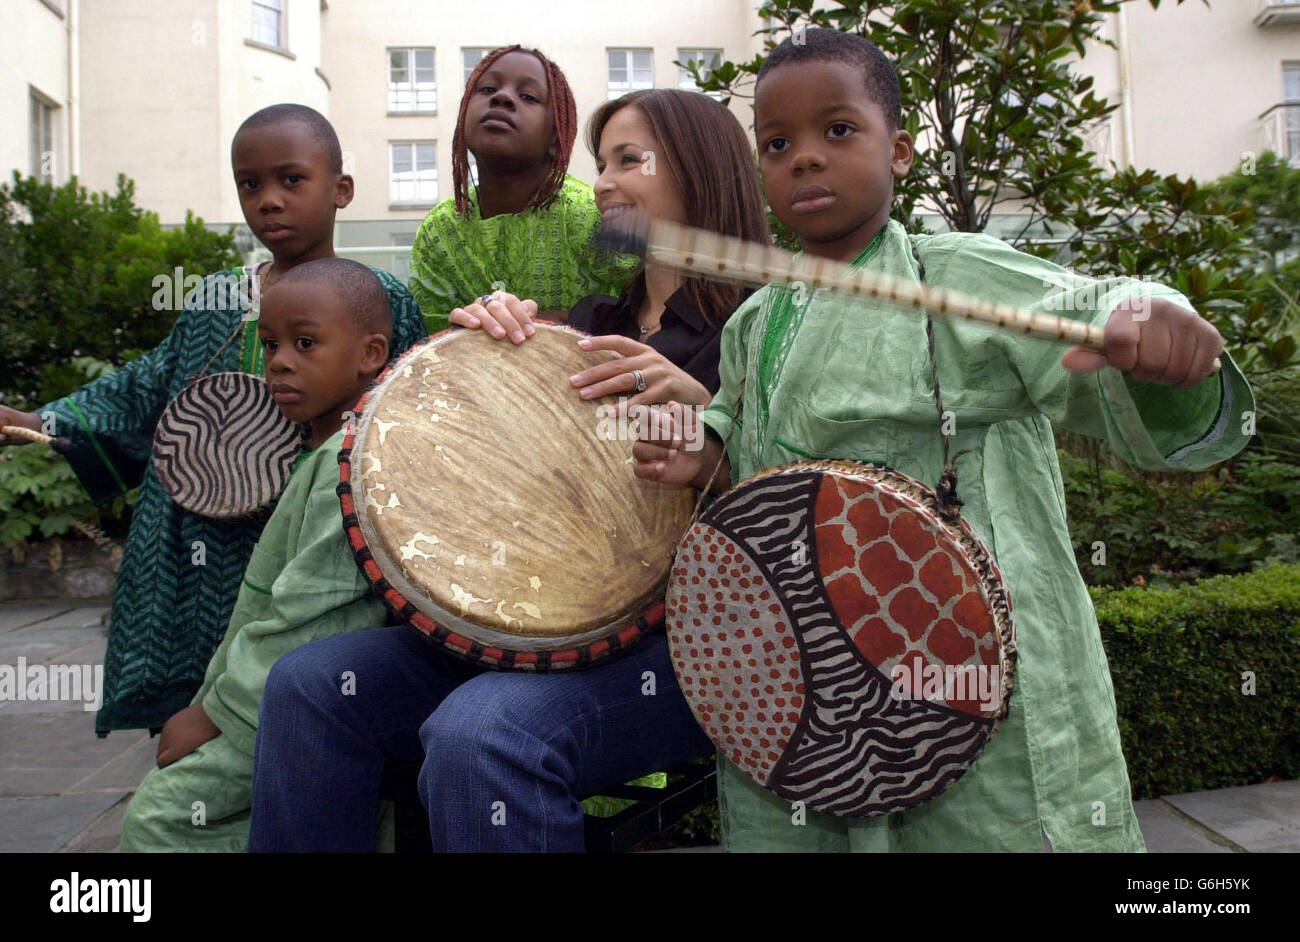 Caroline Corr, the drummer with the Irish band, The Corrs, promoting the Concern Fast 2003, in Dublin, with, from left, Shawndale, 5, Keanu, 3, Daniella, 7, and Timi, 4, originally from Nigeria and now living in Athy in Ireland. The Fast will take place on Friday November 28 and it is hoped that schools, businesses and individuals around the country will help Concern raise support for developing countries worldwide. Stock Photo